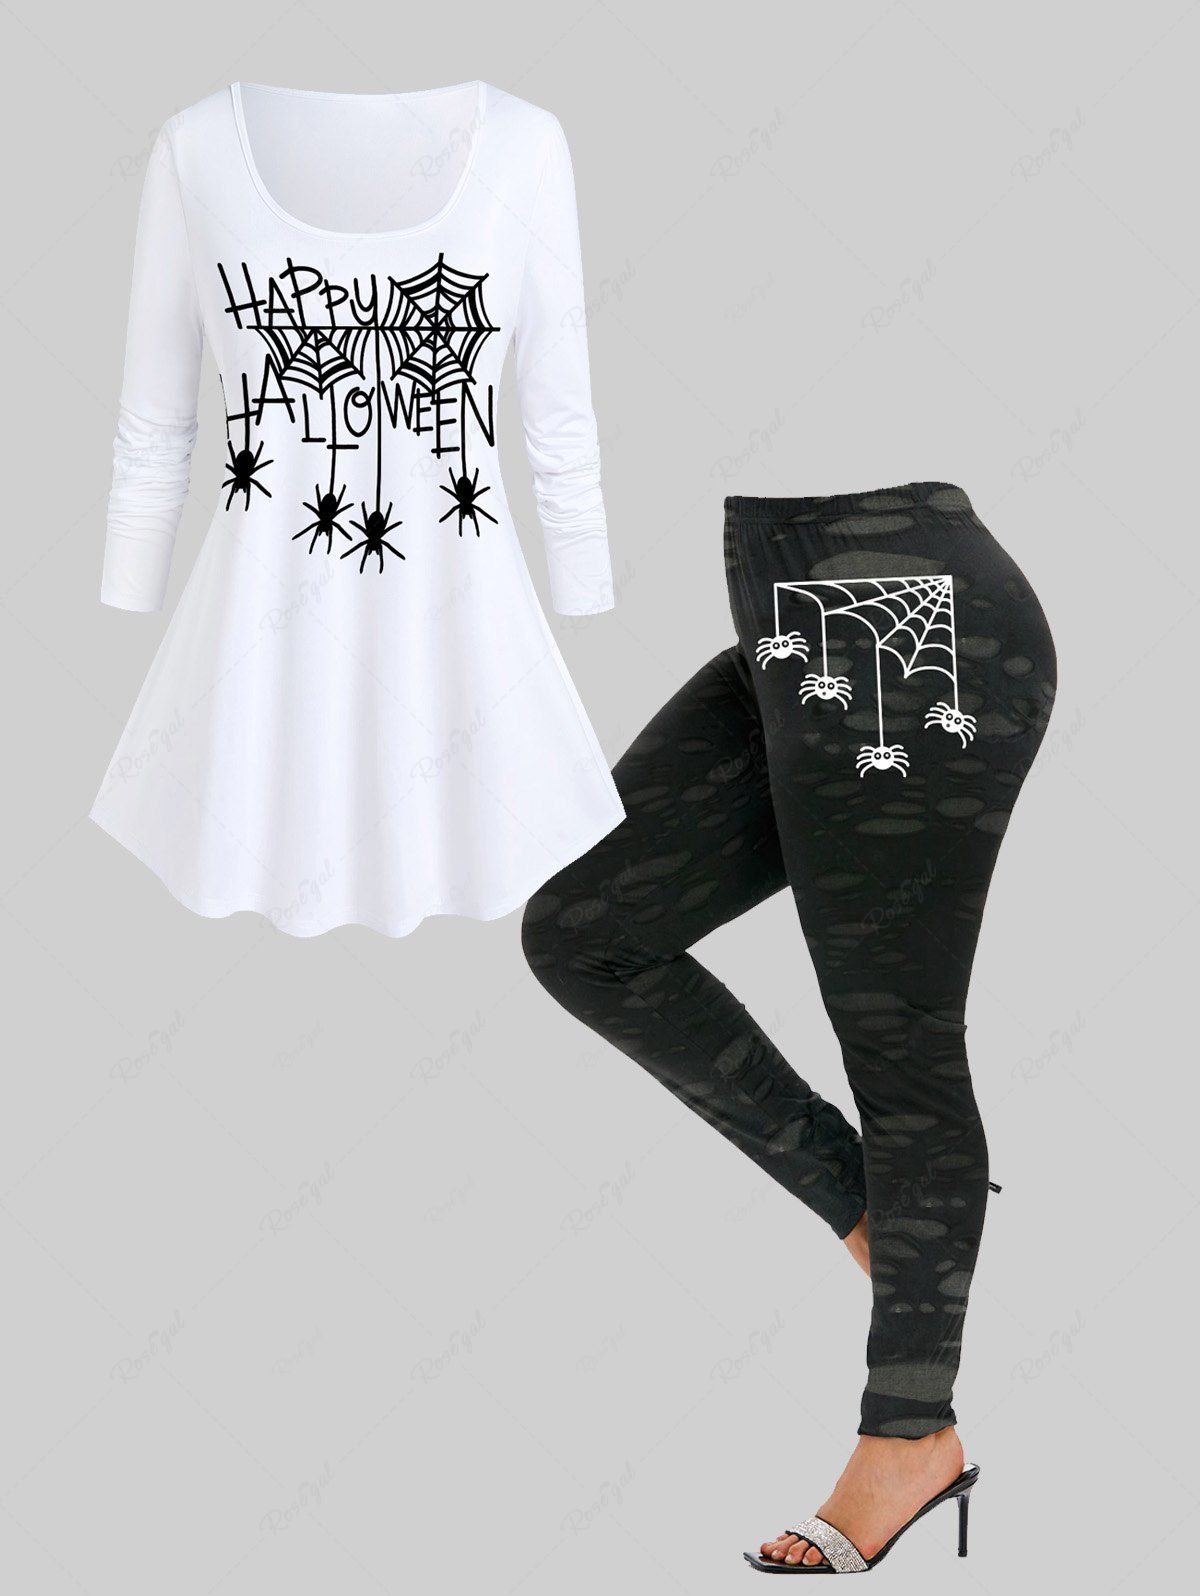 New Halloween Spiders Web Print T-shirt and Spiders Web 3D Ripped Print Leggings Outfit  